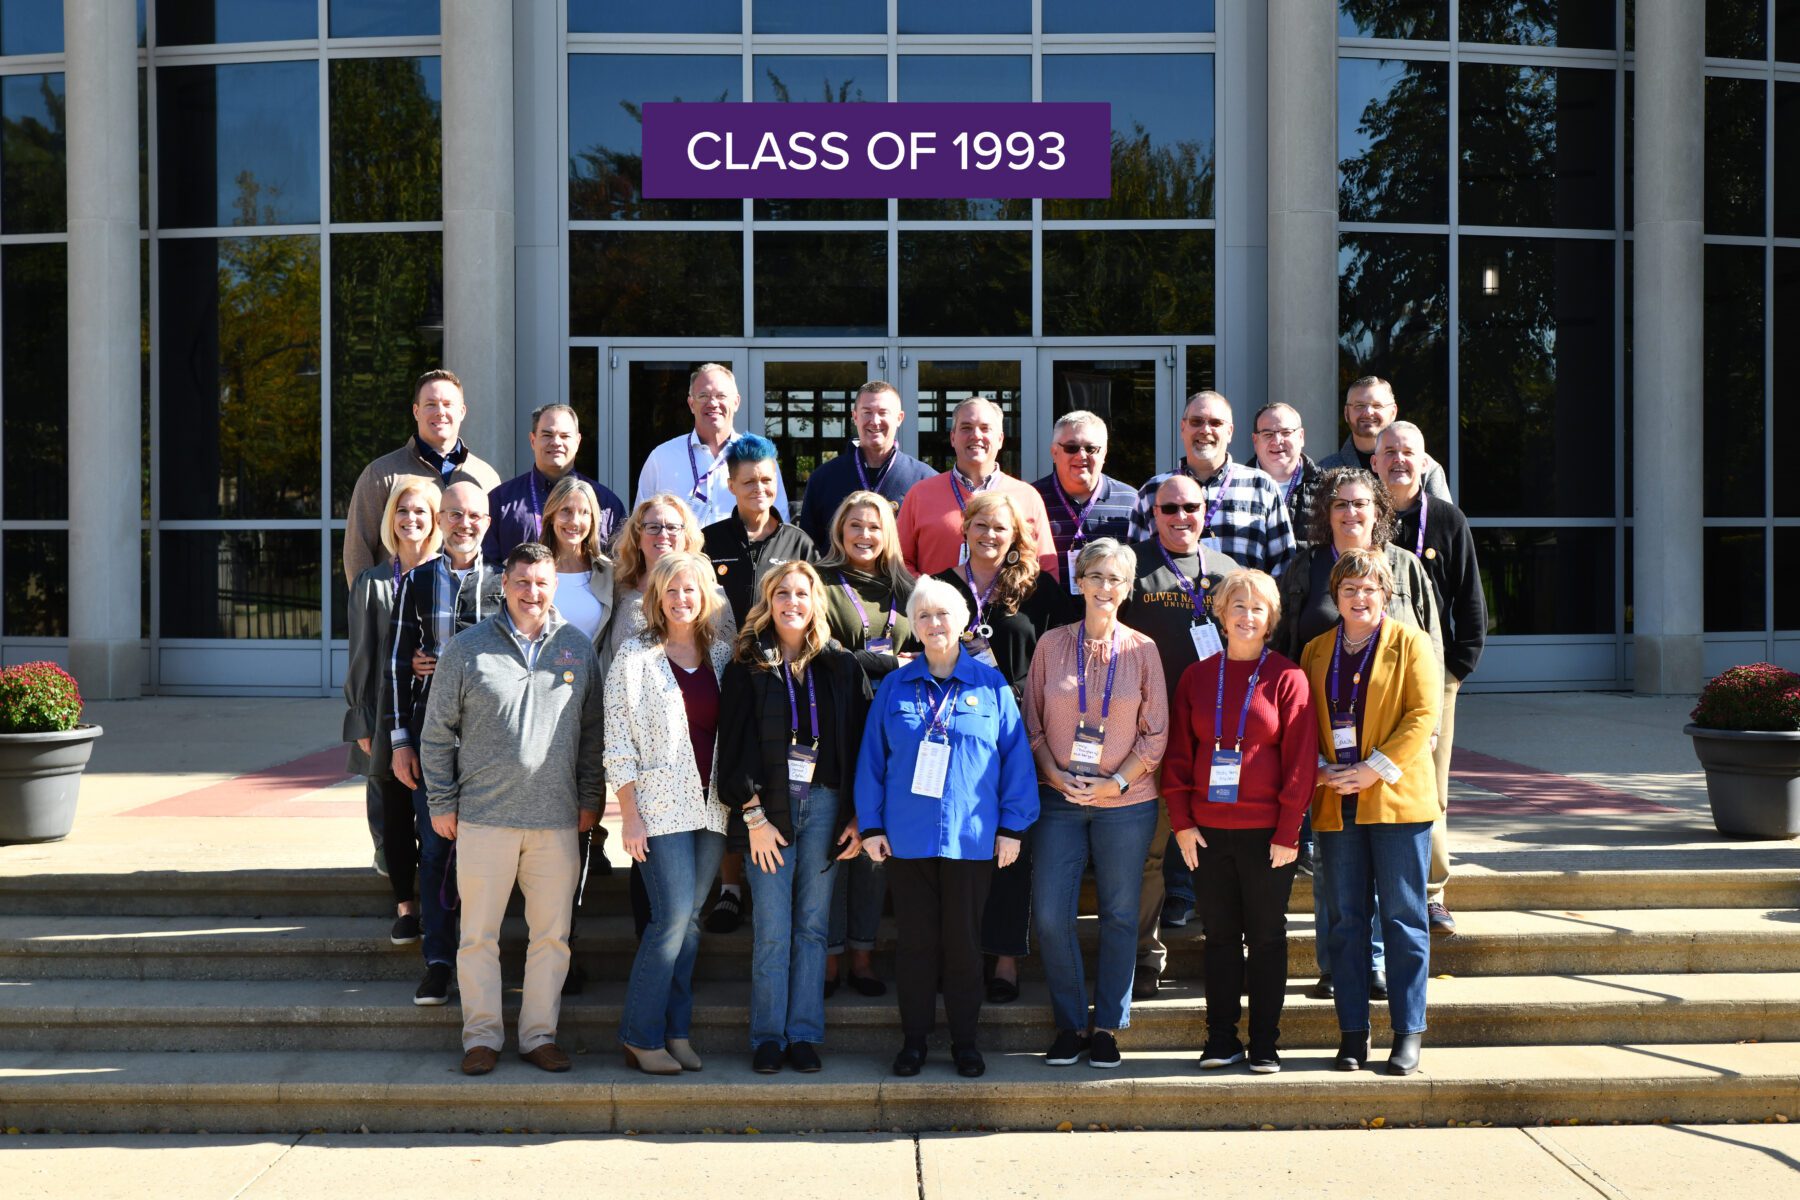 Those who came for the class reunion of 1993 pose for a group photo